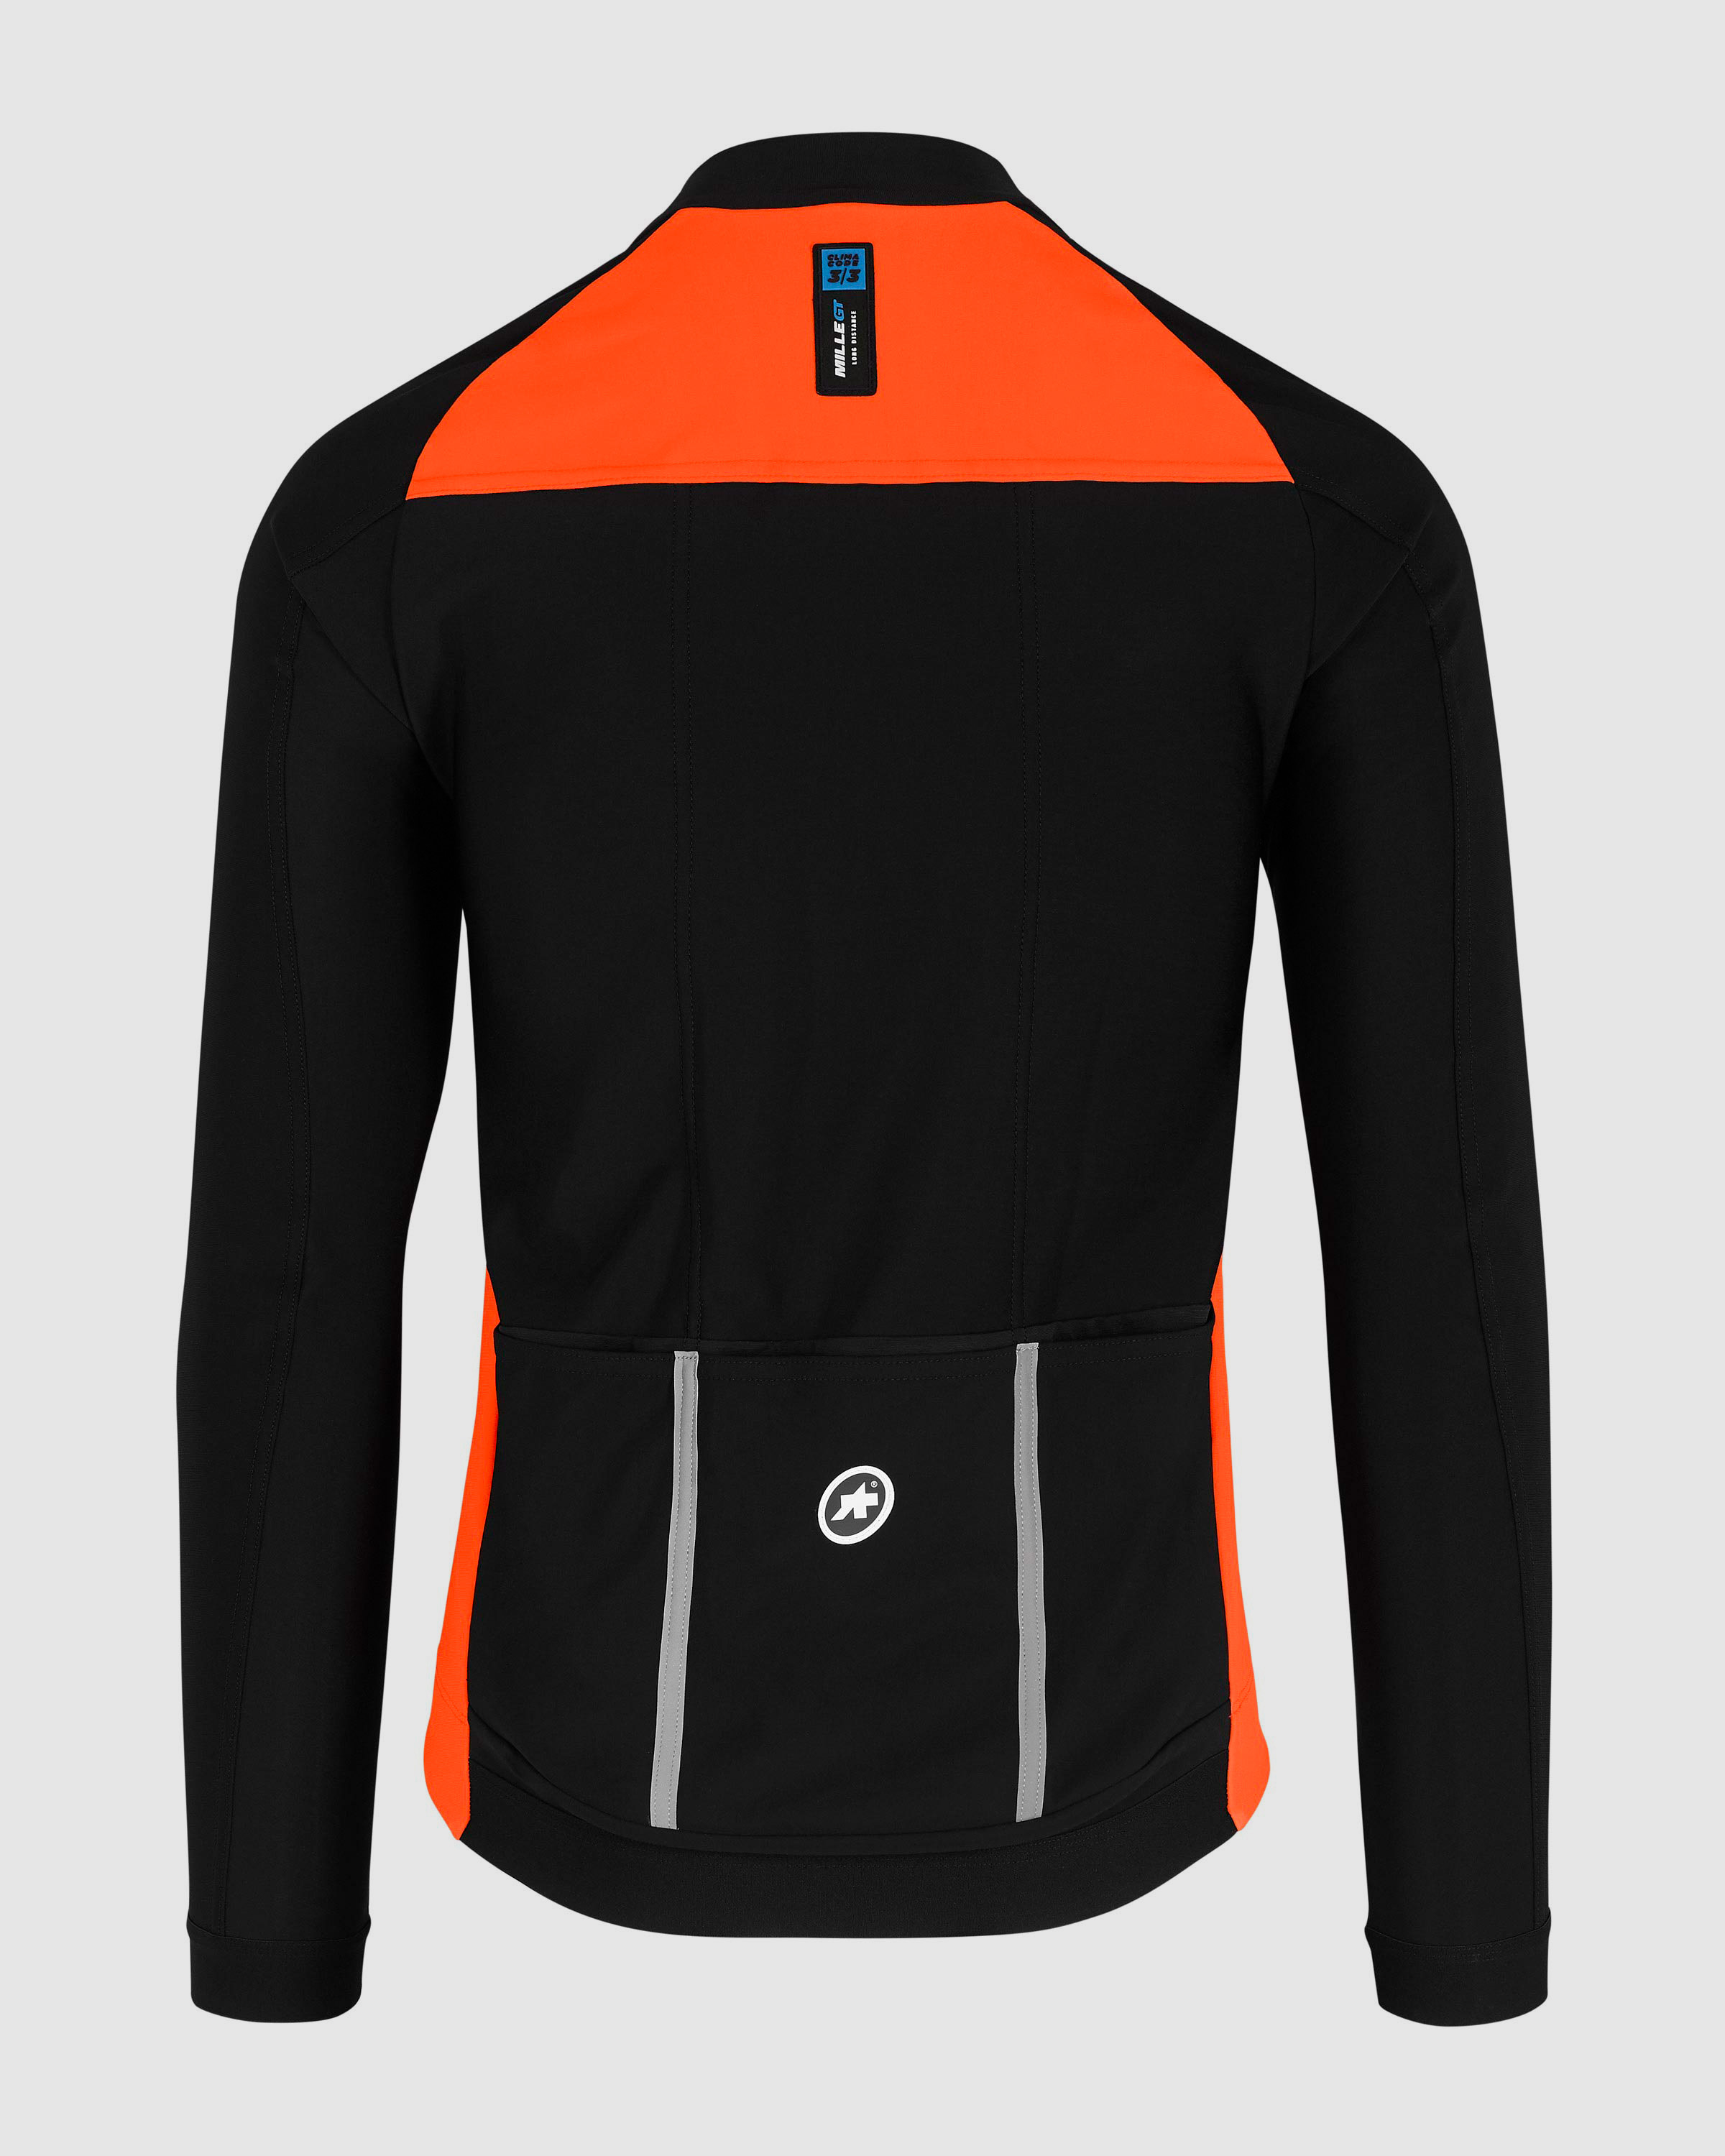 MILLE GT Winter Jacket EVO - ASSOS Of Switzerland - Official Outlet